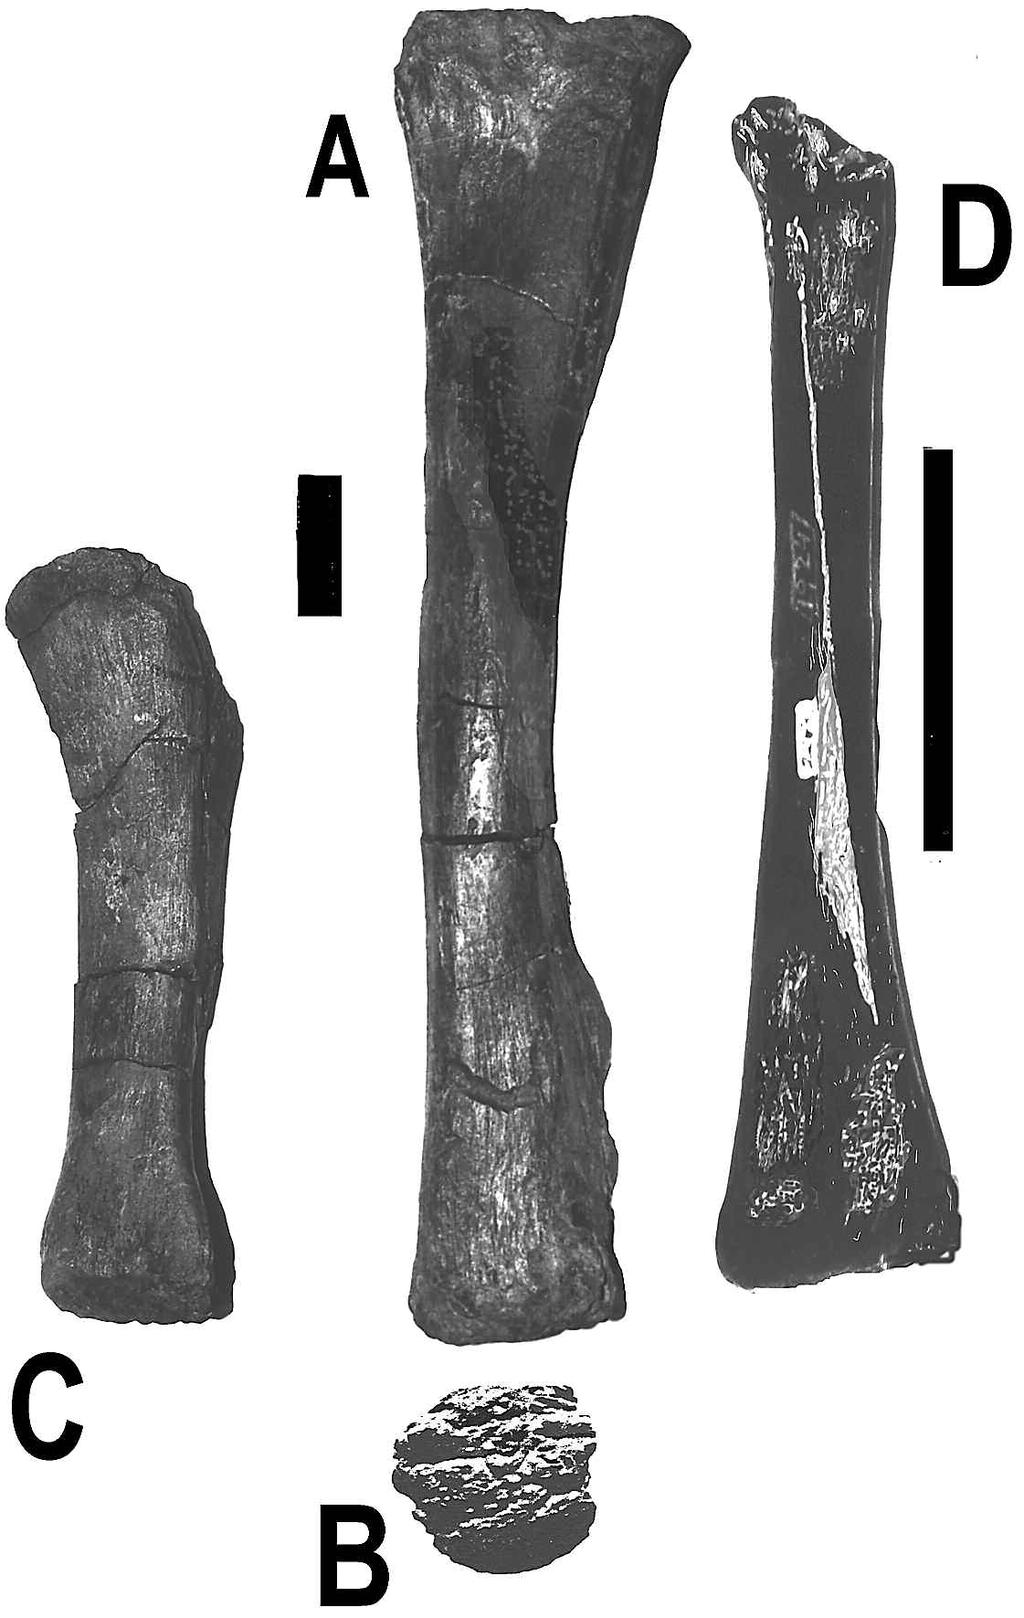 This end is somewhat weathered, showing very little detail on the posterior face. The right radius, which was recovered in nearly perfect condition, is quite slender in contrast to Chubutisaurus (fig.